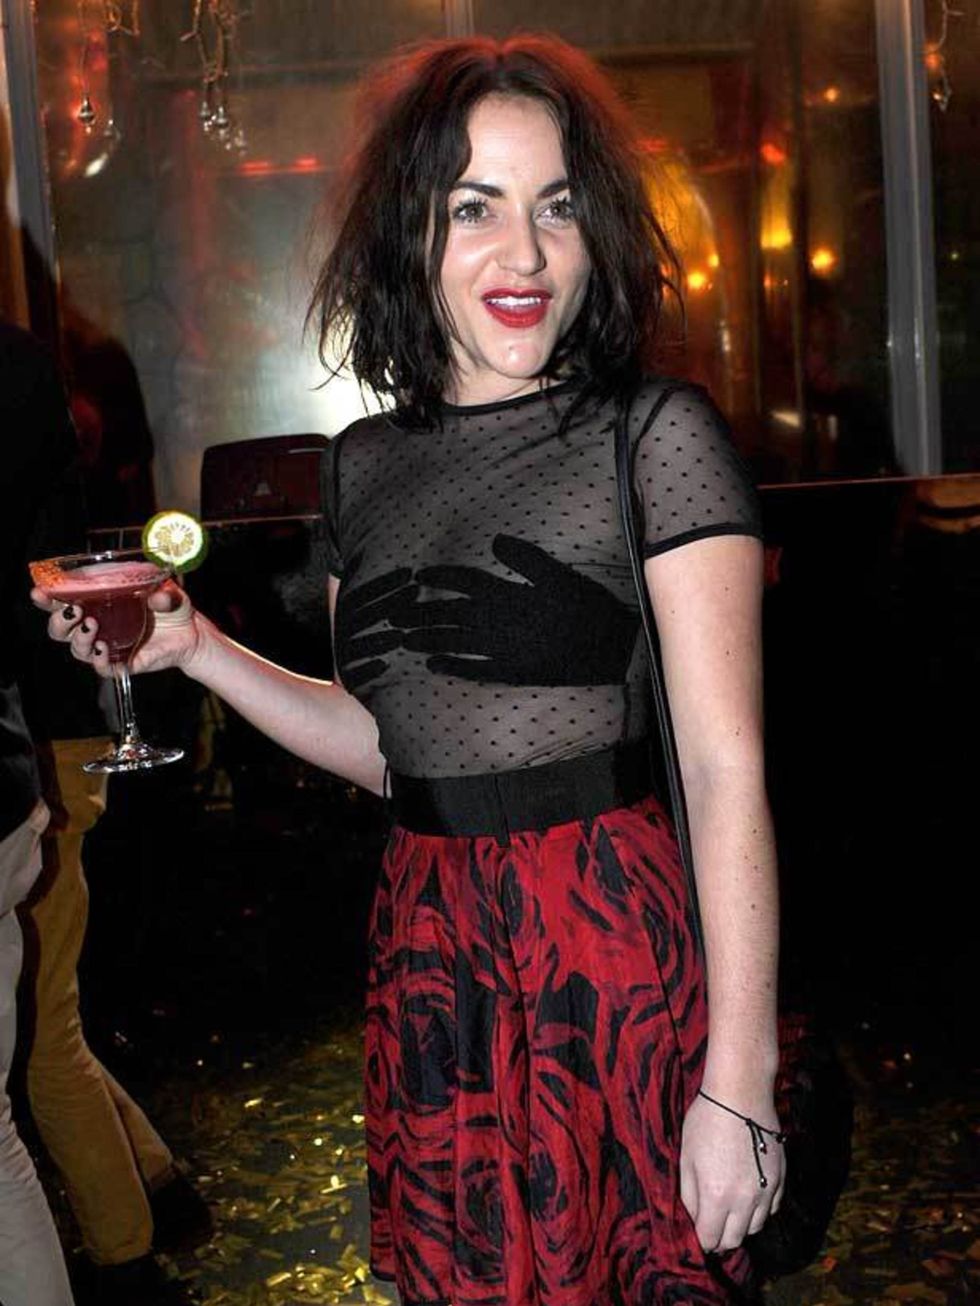 <p><a href="http://www.elleuk.com/starstyle/style-files/%28section%29/jaime-winstone">Jaime Winstone</a> wearing an Antipodium skirt and top </p>